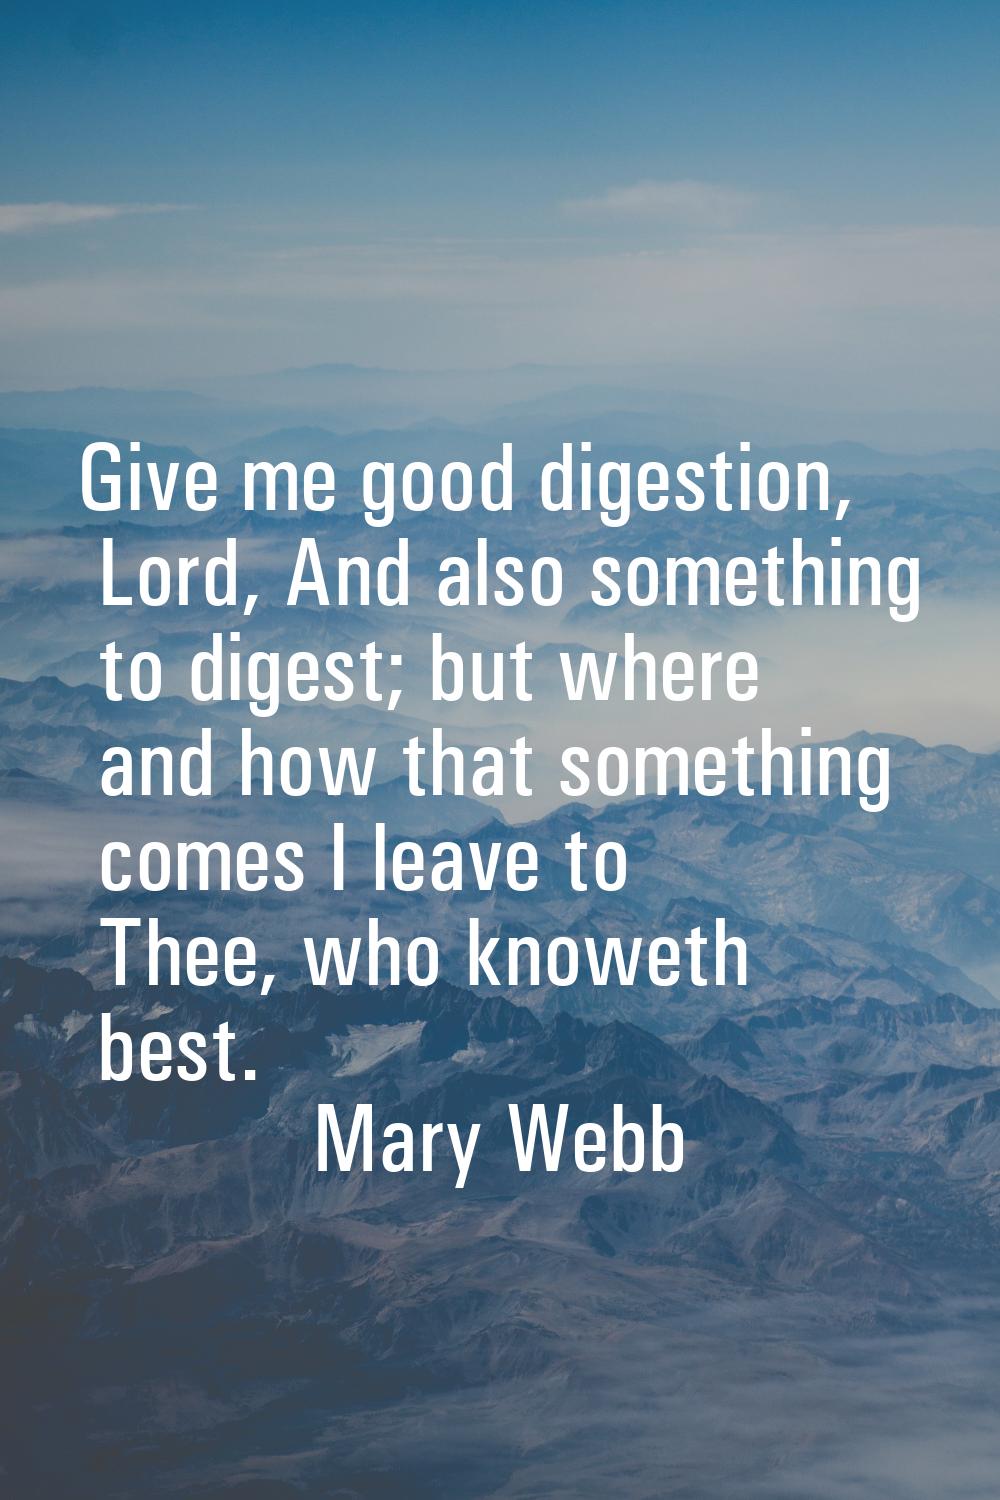 Give me good digestion, Lord, And also something to digest; but where and how that something comes 